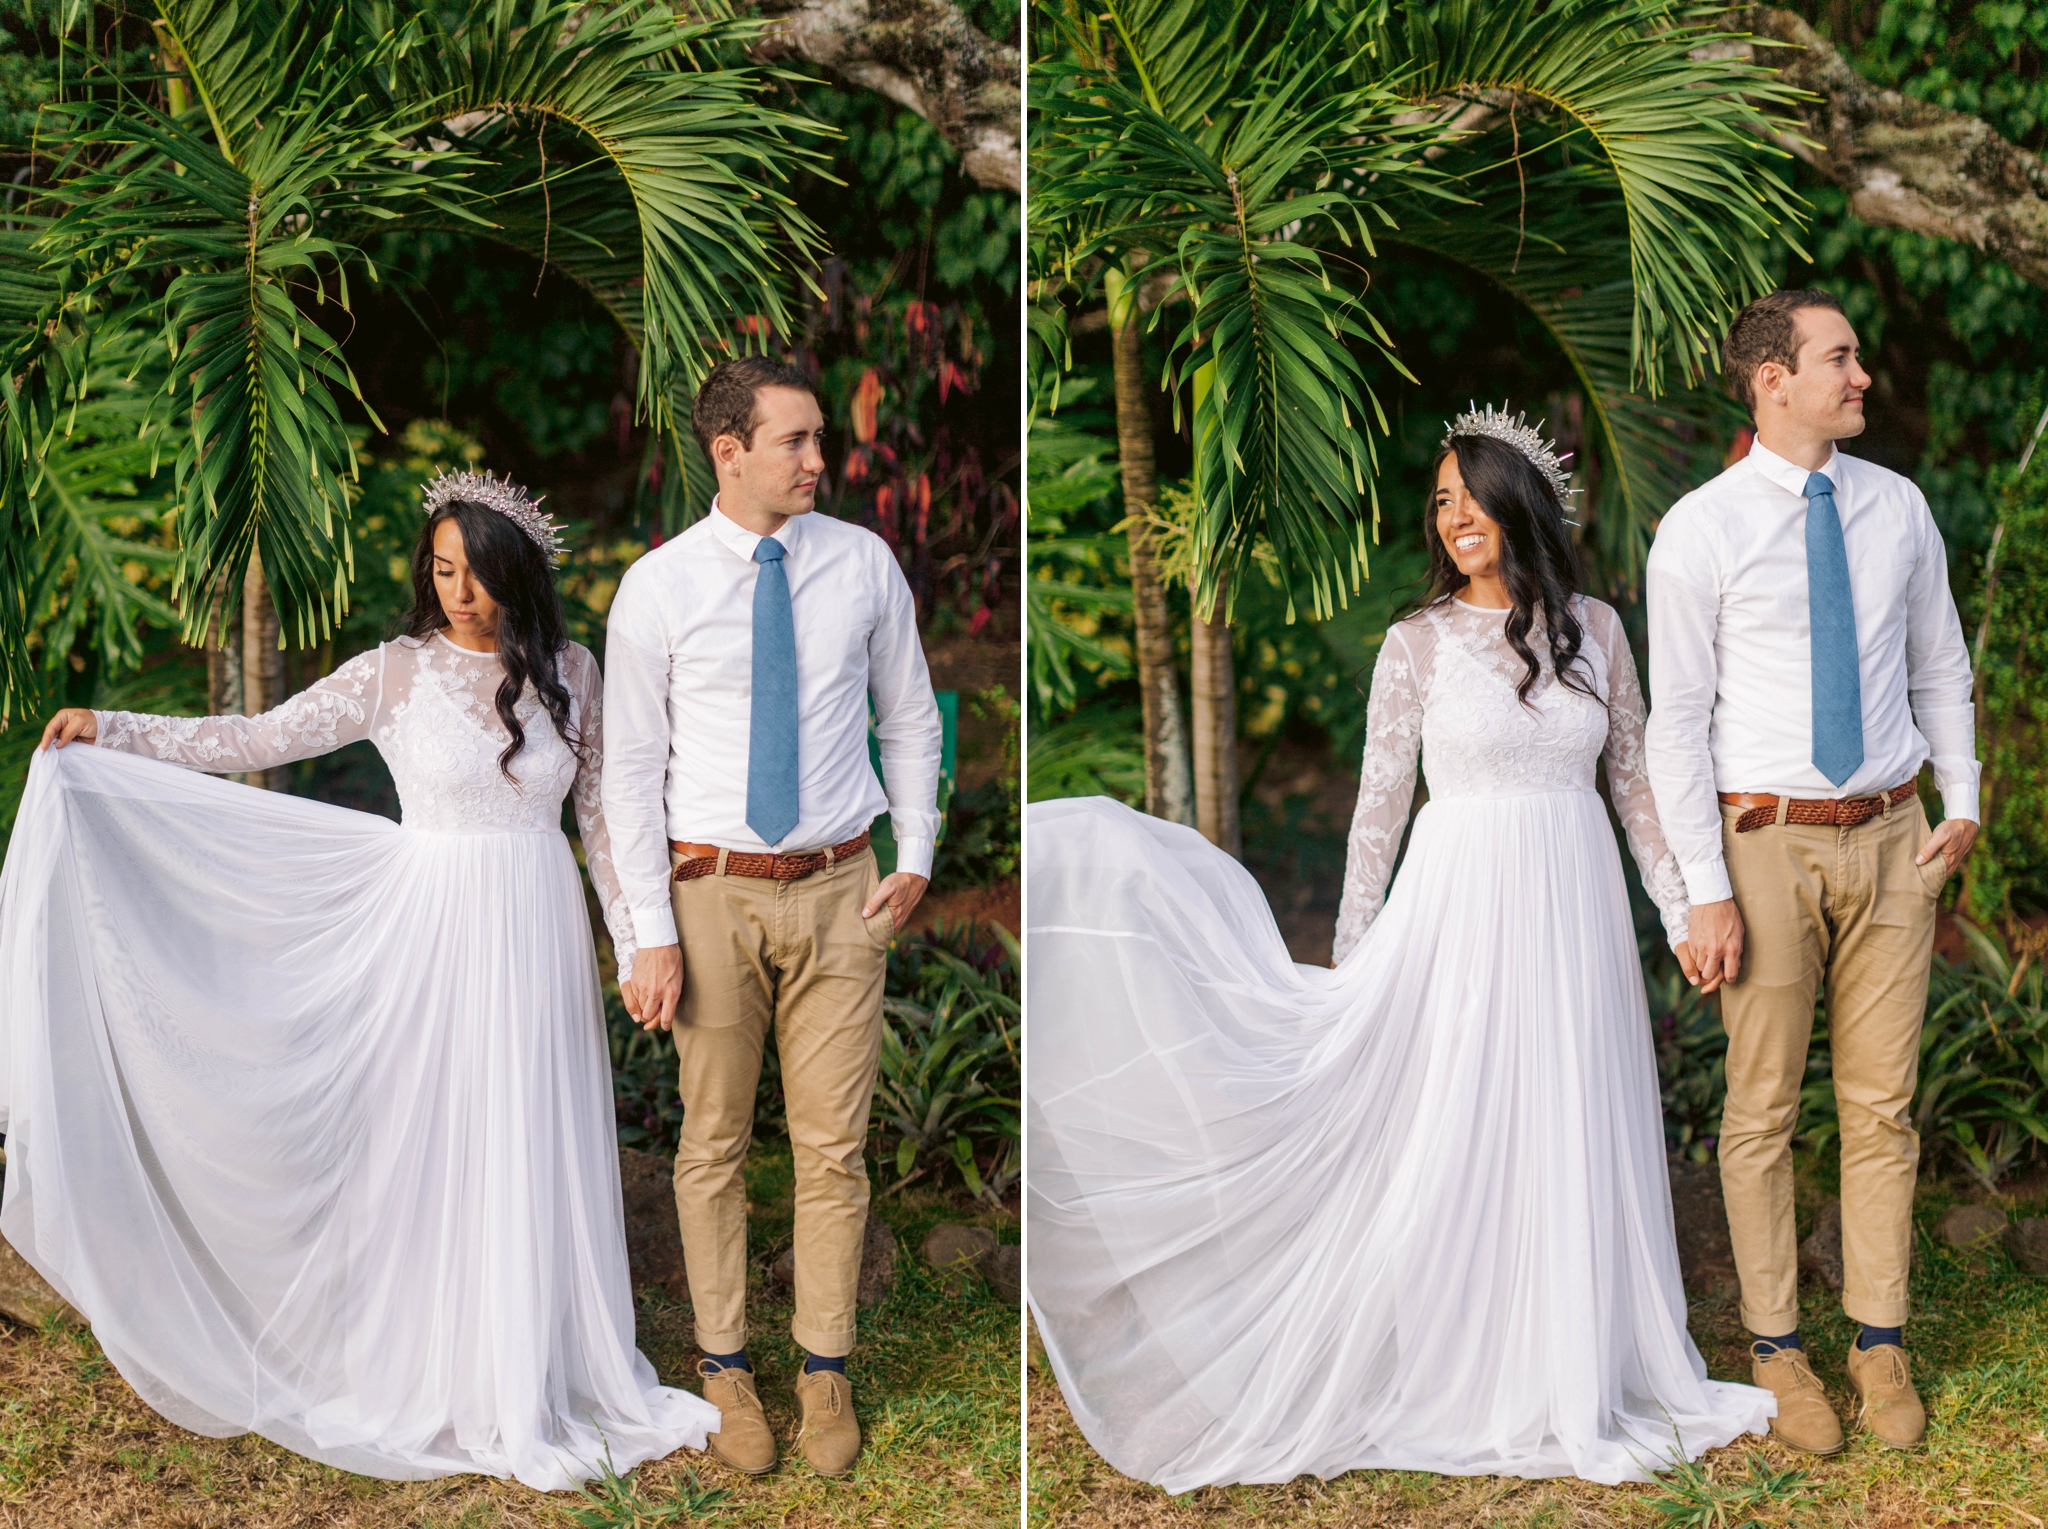  Bride playing with her asos wedding dress underneath palm trees while holding hands with her groom Ana + Elijah - Wedding at Loulu Palm in Haleiwa, HI - Oahu Hawaii Wedding Photographer - #hawaiiweddingphotographer #oahuweddings #hawaiiweddings 